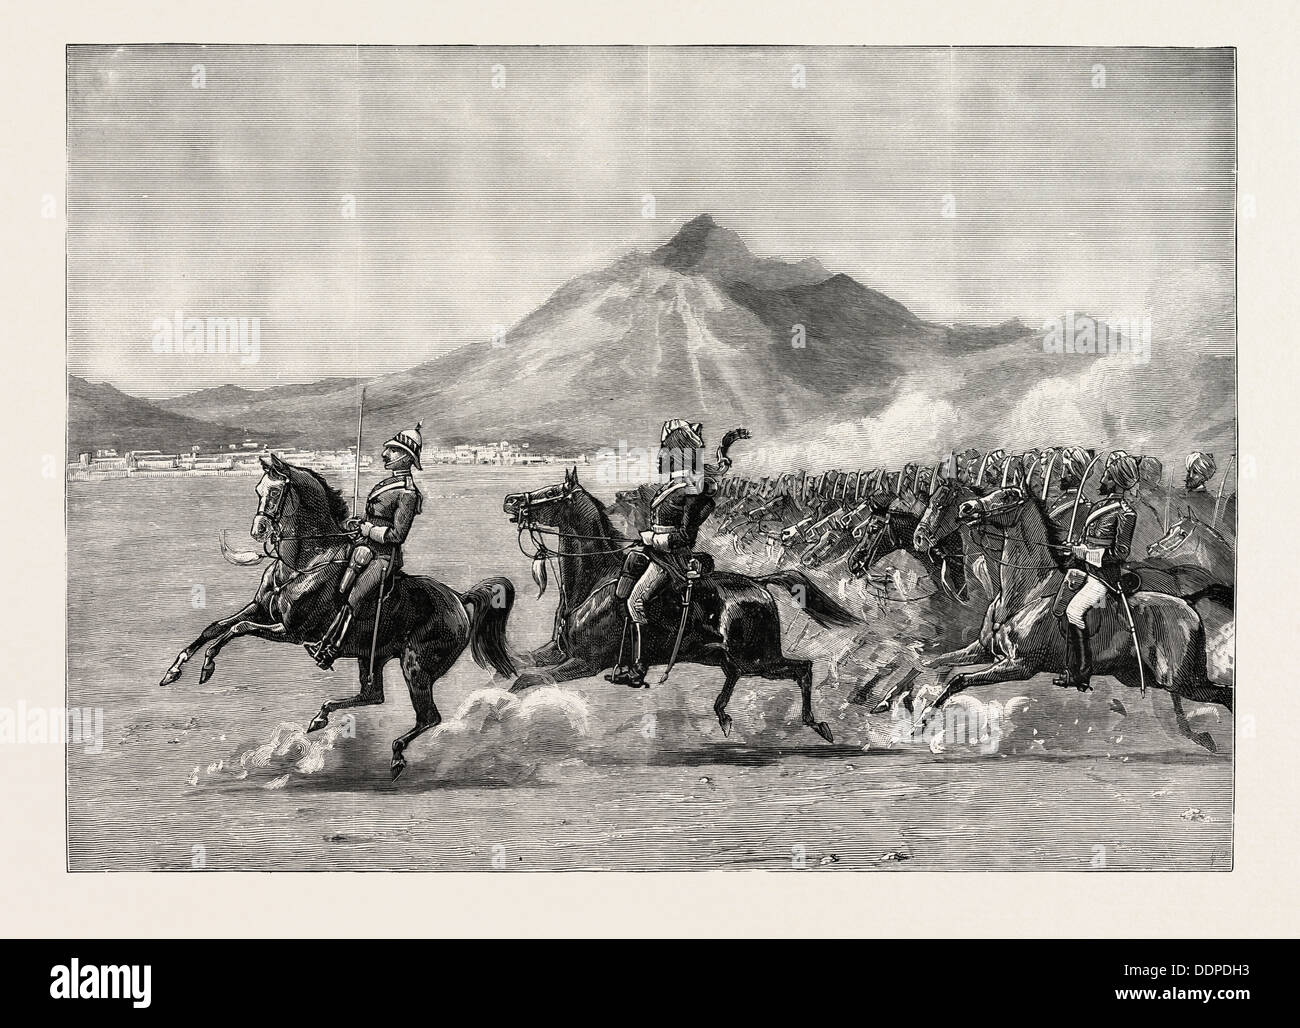 FAREWELL REVIEW BEFORE H.R.H. THE DUKE OF CONNAUGHT AT QUETTA, PROVINCE OF BALOCHISTAN, PAKISTAN, engraving 1890 Stock Photo